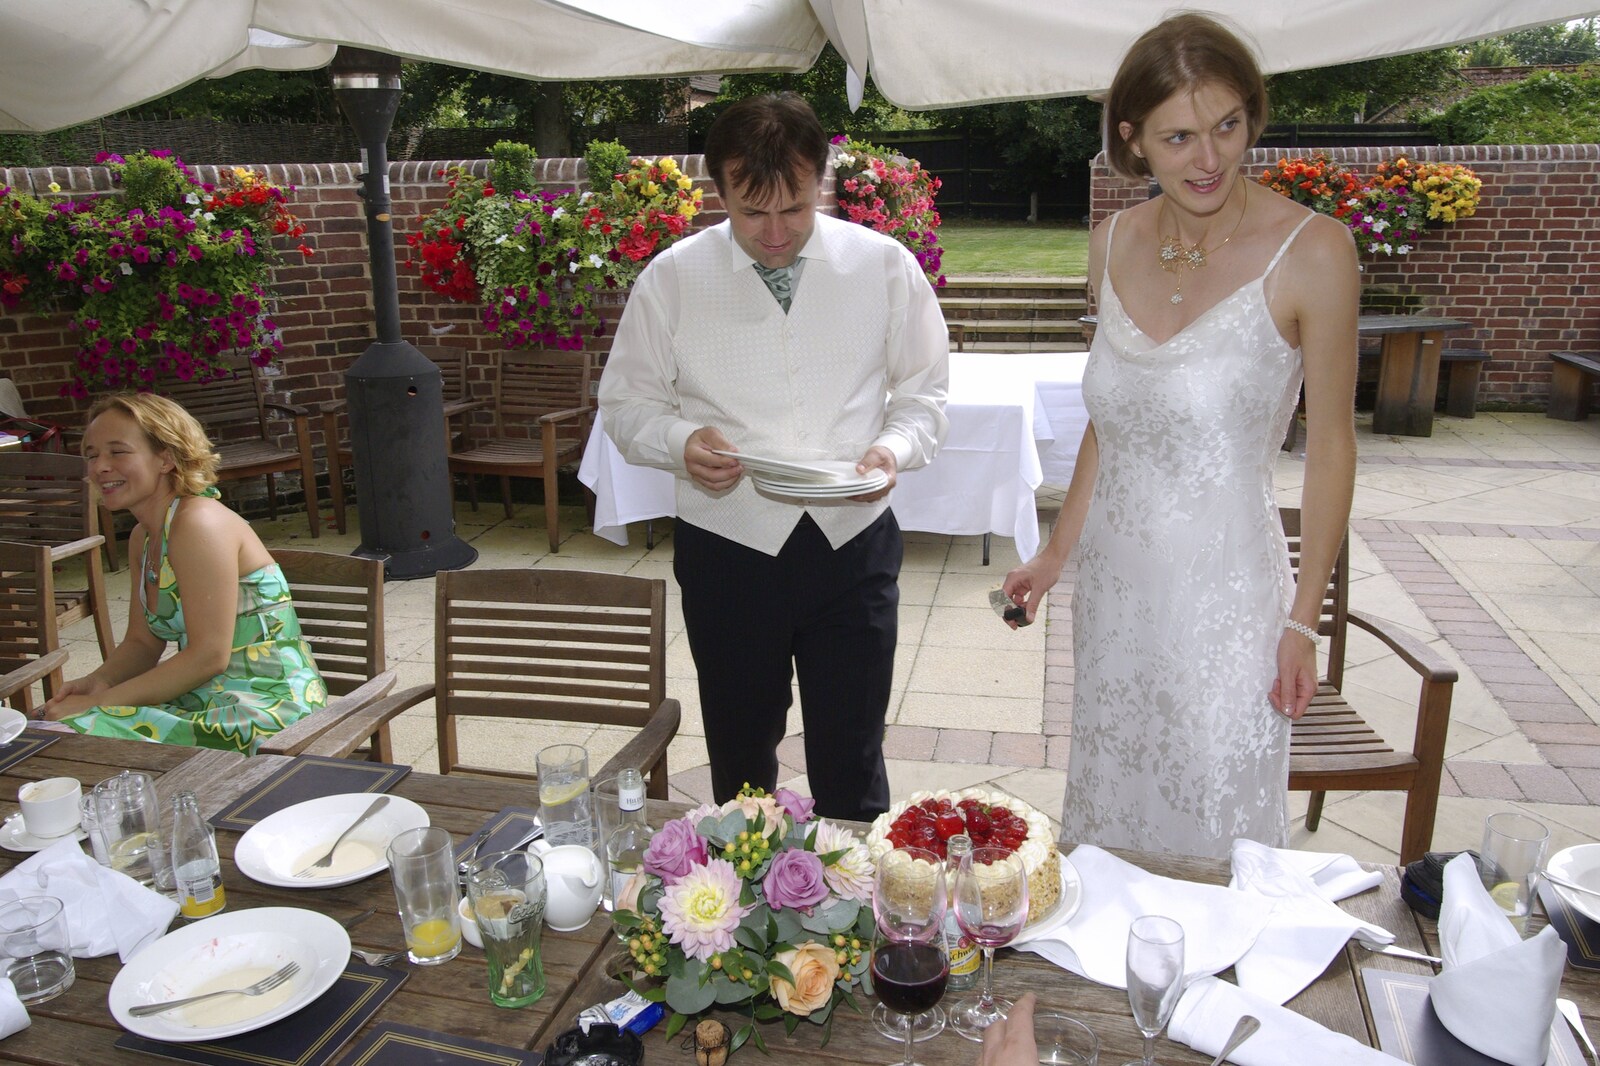 Liviu and Christina's Wedding Day, Babraham, Cambridge - 11th August 2007: Liviu sorts some plates out